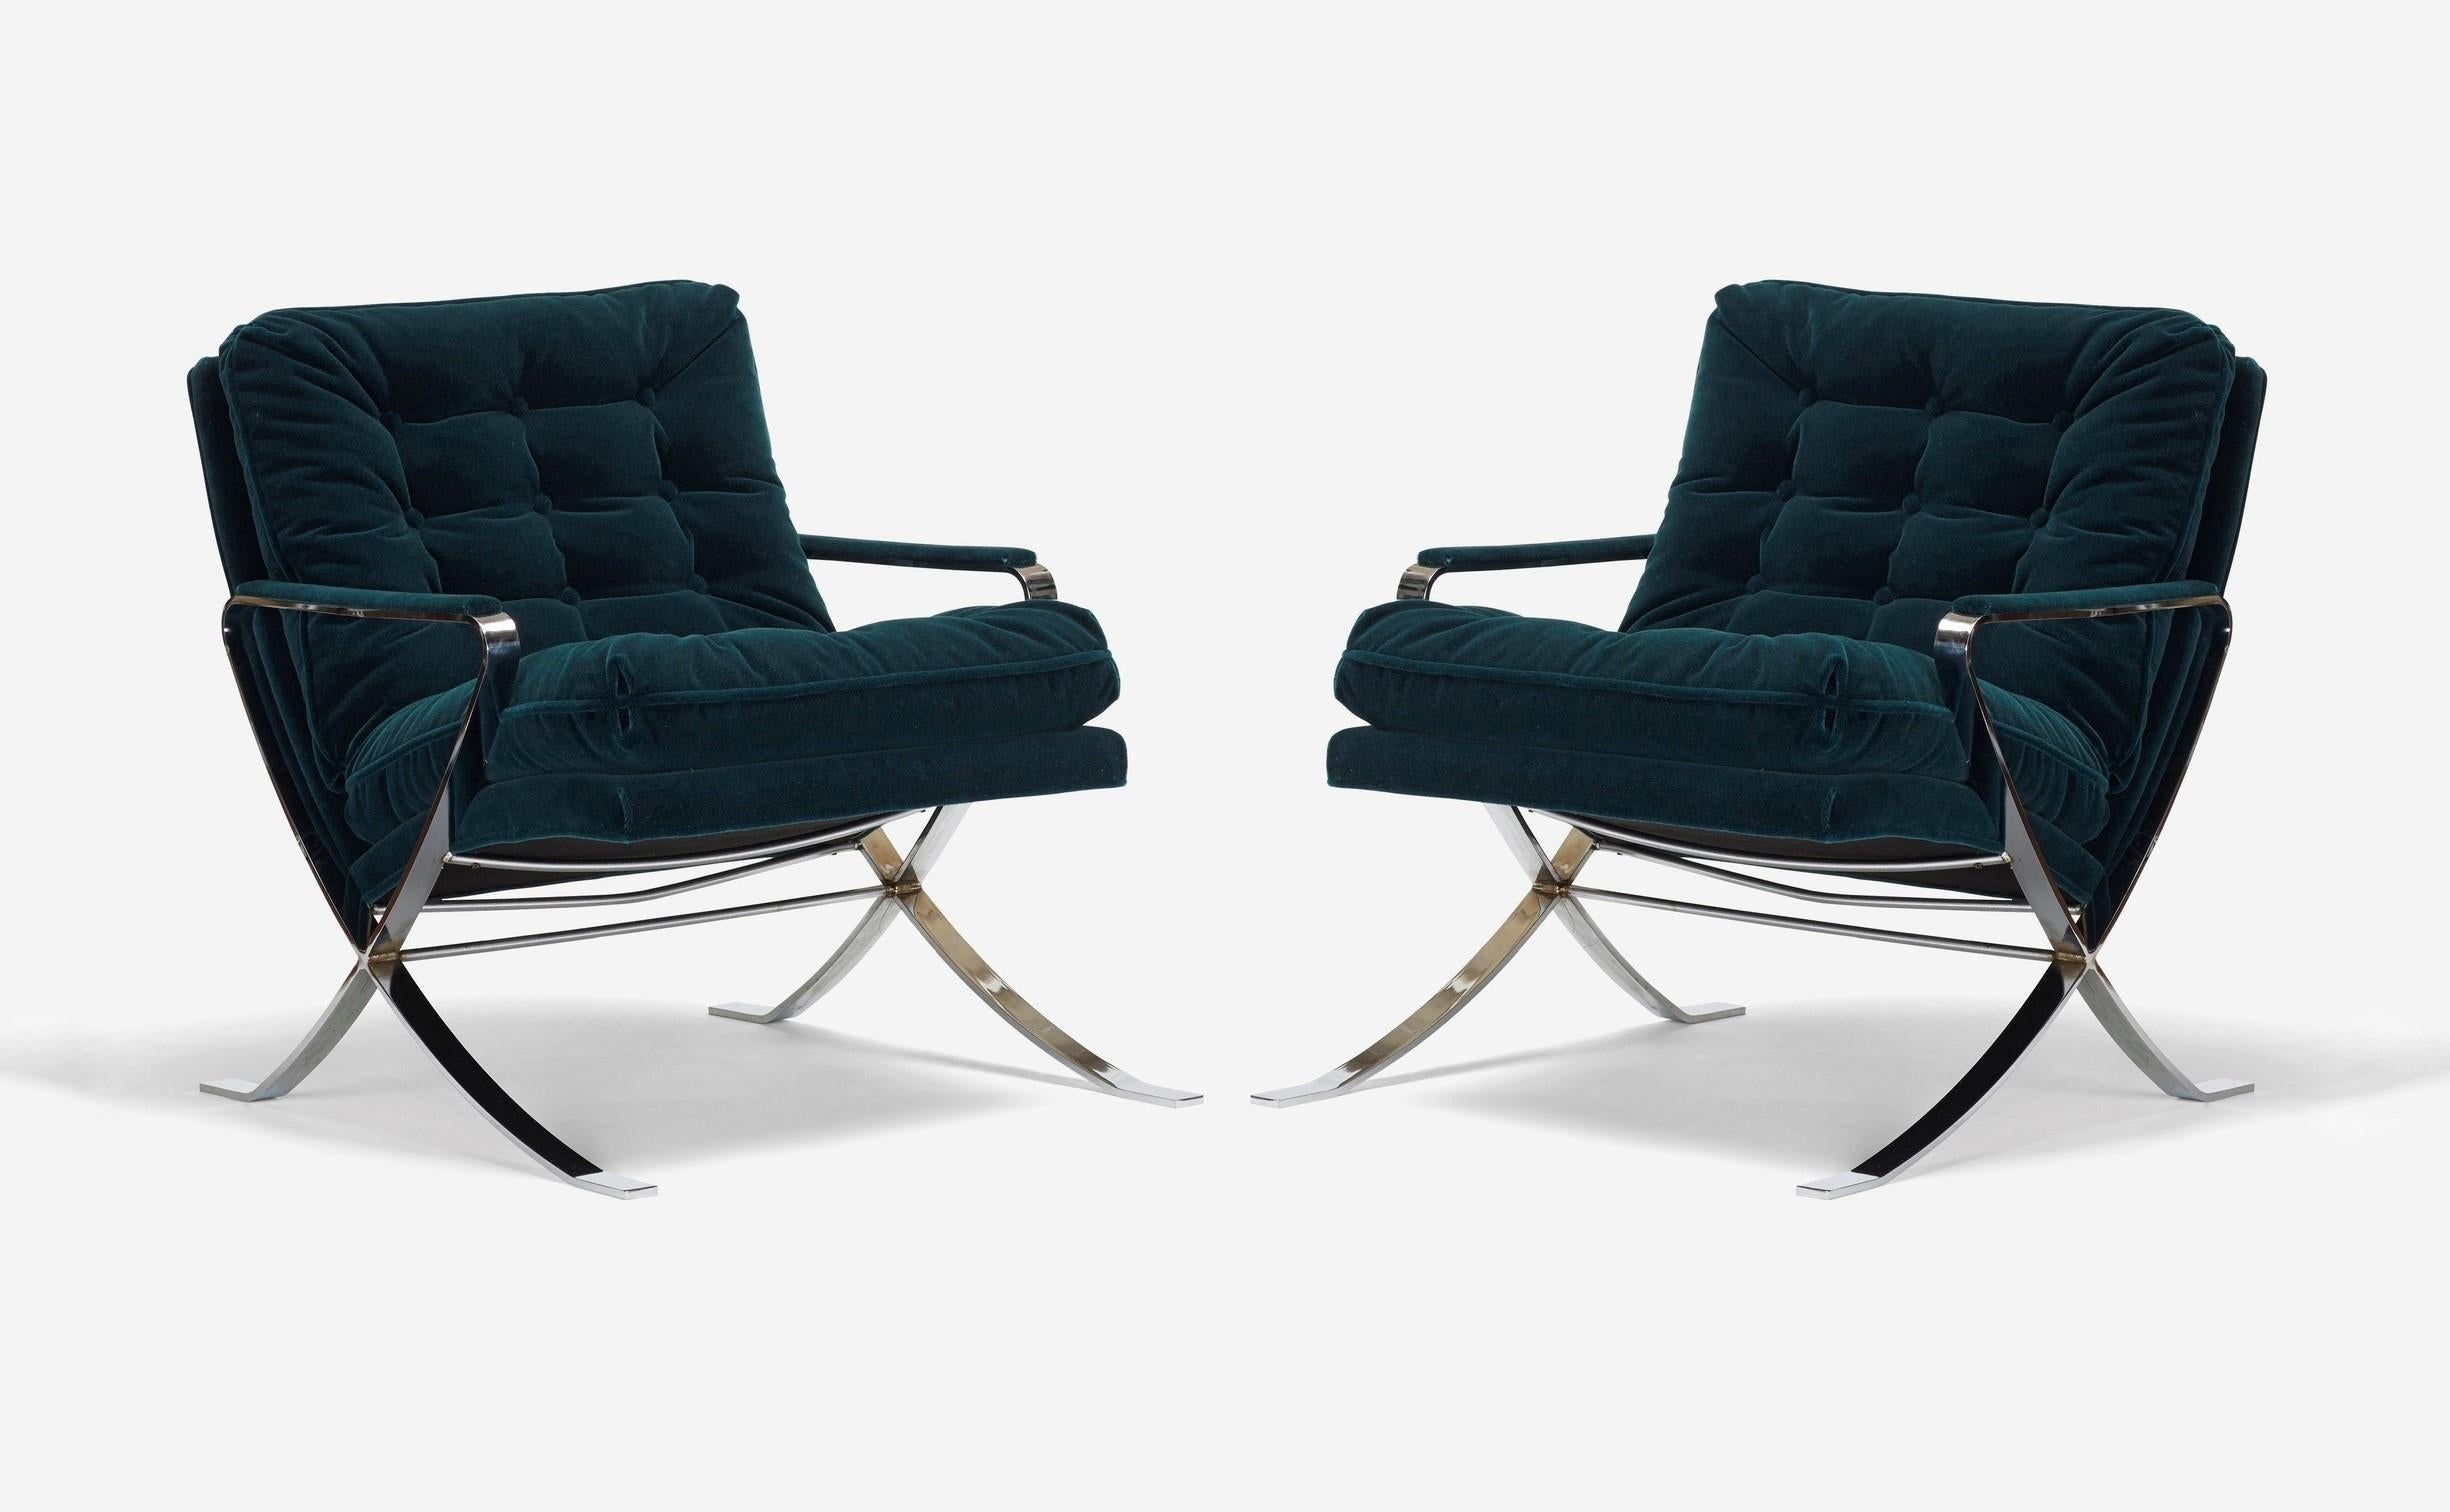 Elegant pair of newly upholstered in plush green velvet and flat steel chromed lounge chairs by Flair Furniture, inspired by the chair designs of Milo Baughman and Mies Van der Rohe's (Barcelona Chair). Flair is a lesser known High Point furniture